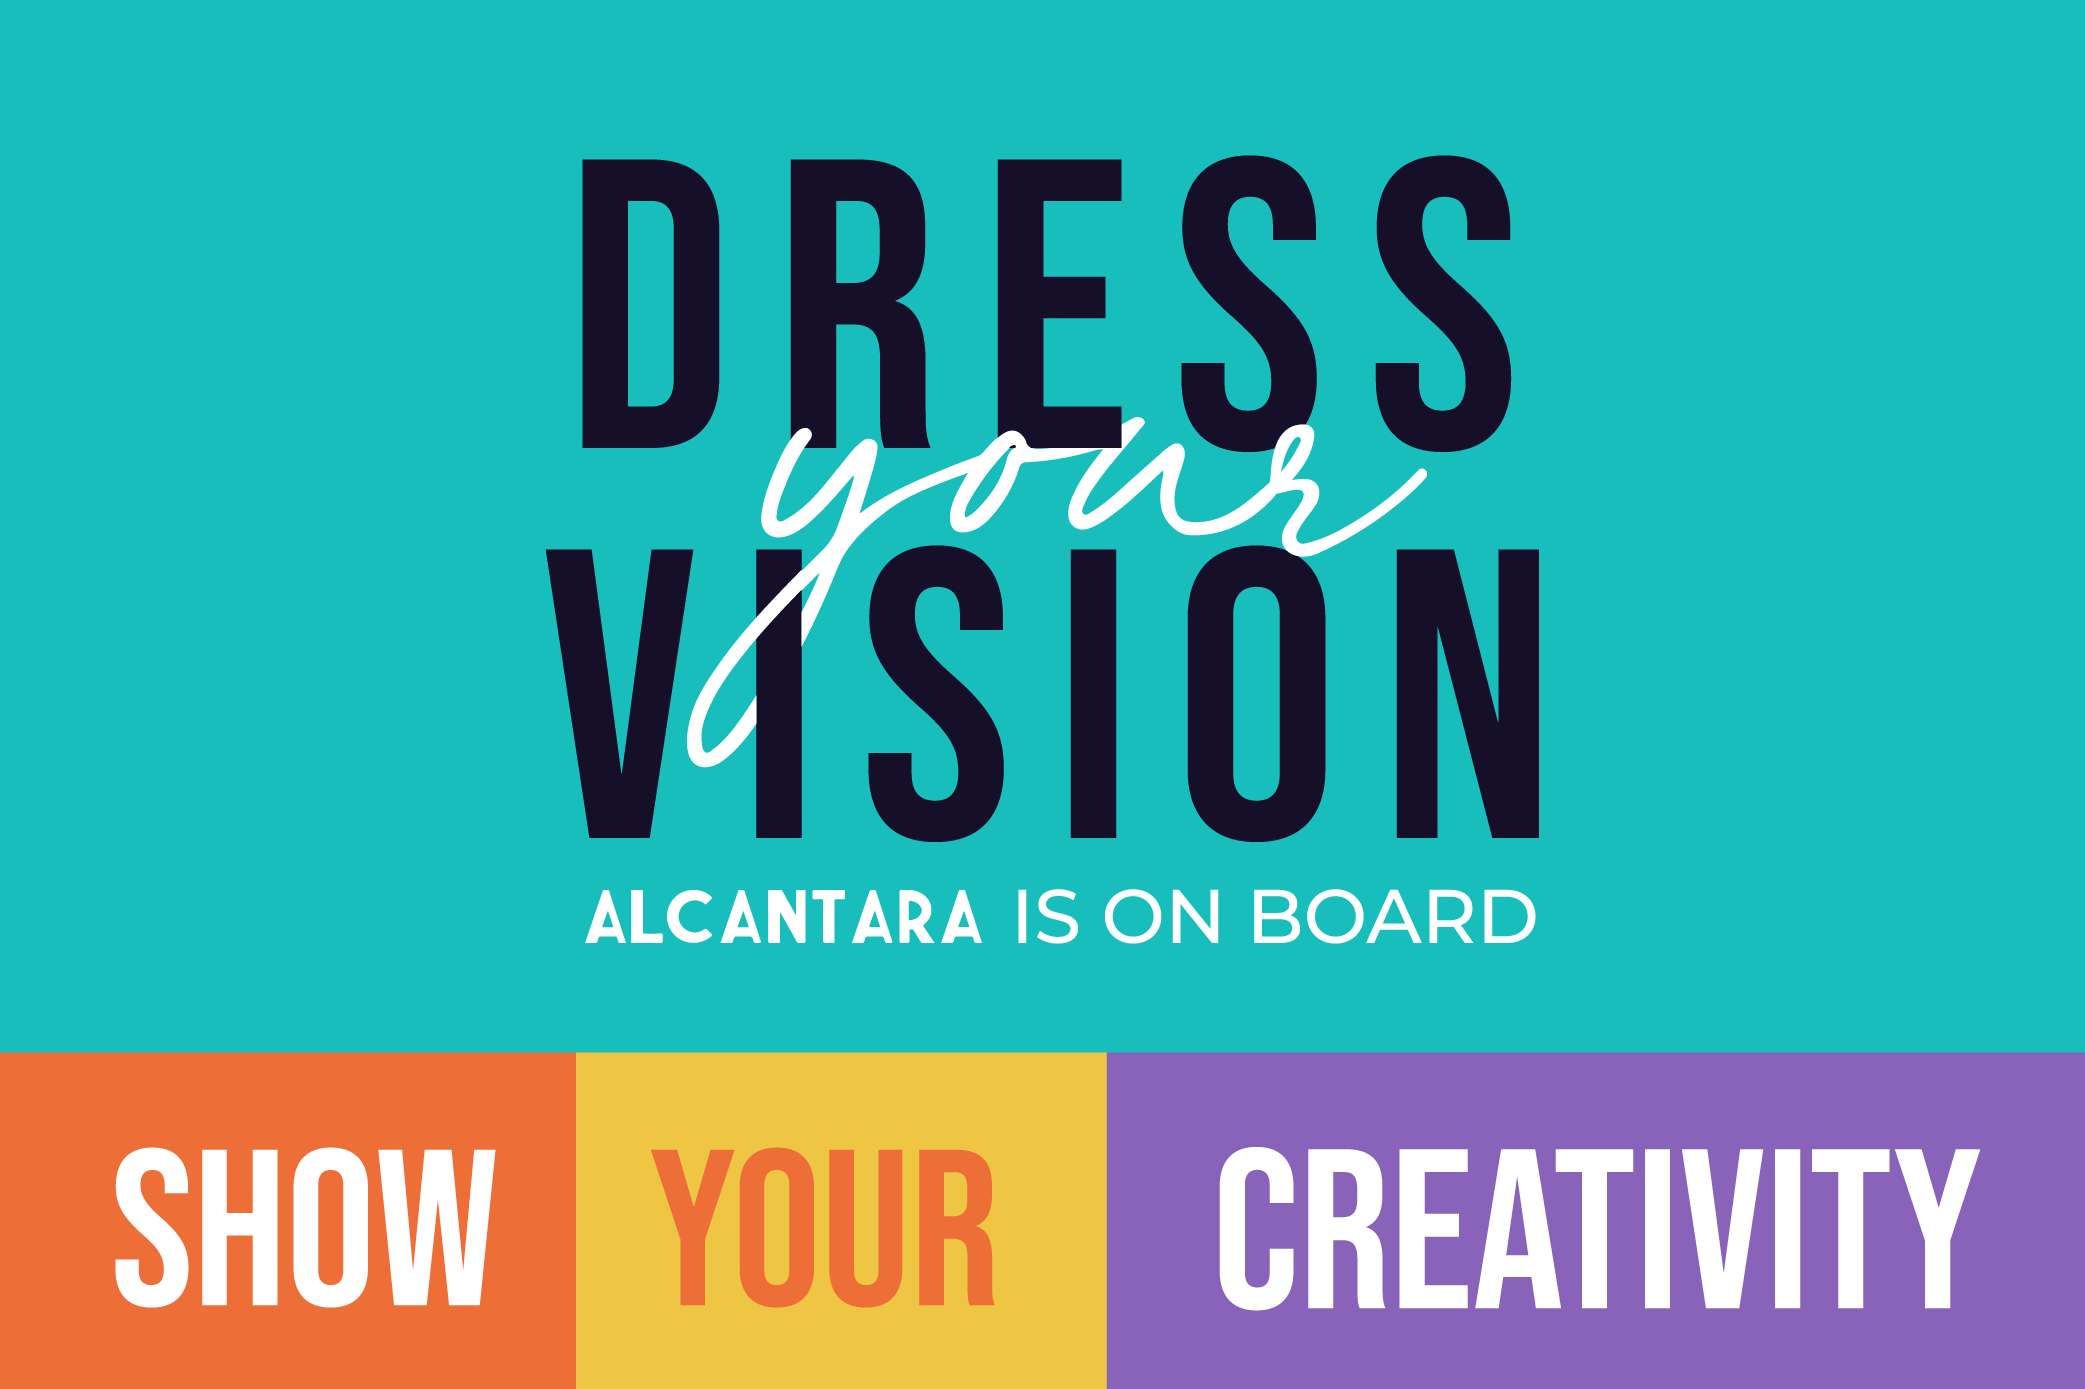 "DRESS YOUR VISION CONTEST": HERE ARE THE FINALISTS AND THE WINNER